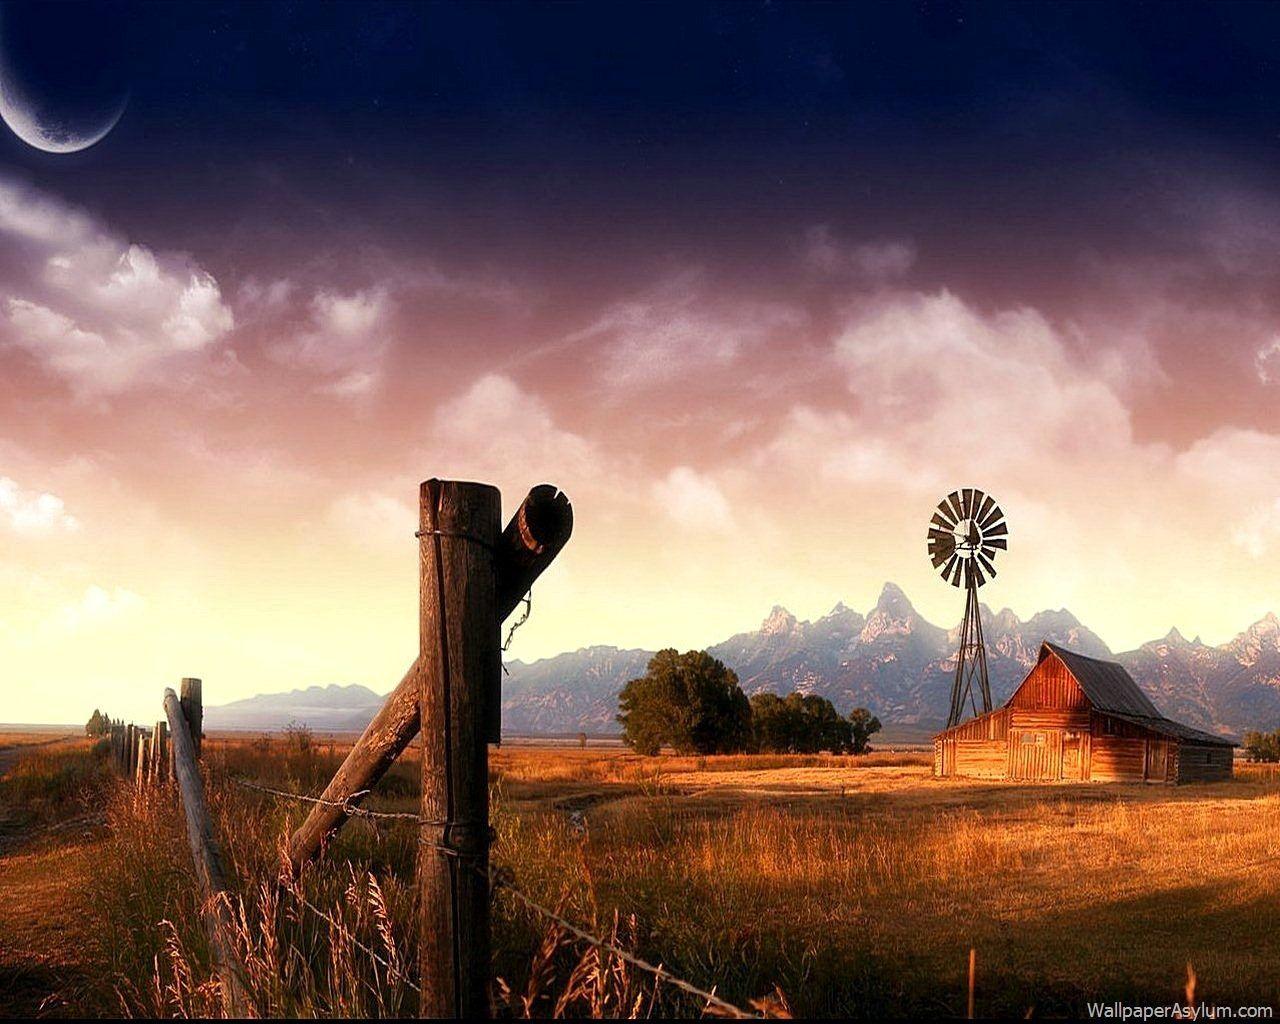 country background. If you like country life, check out the farm